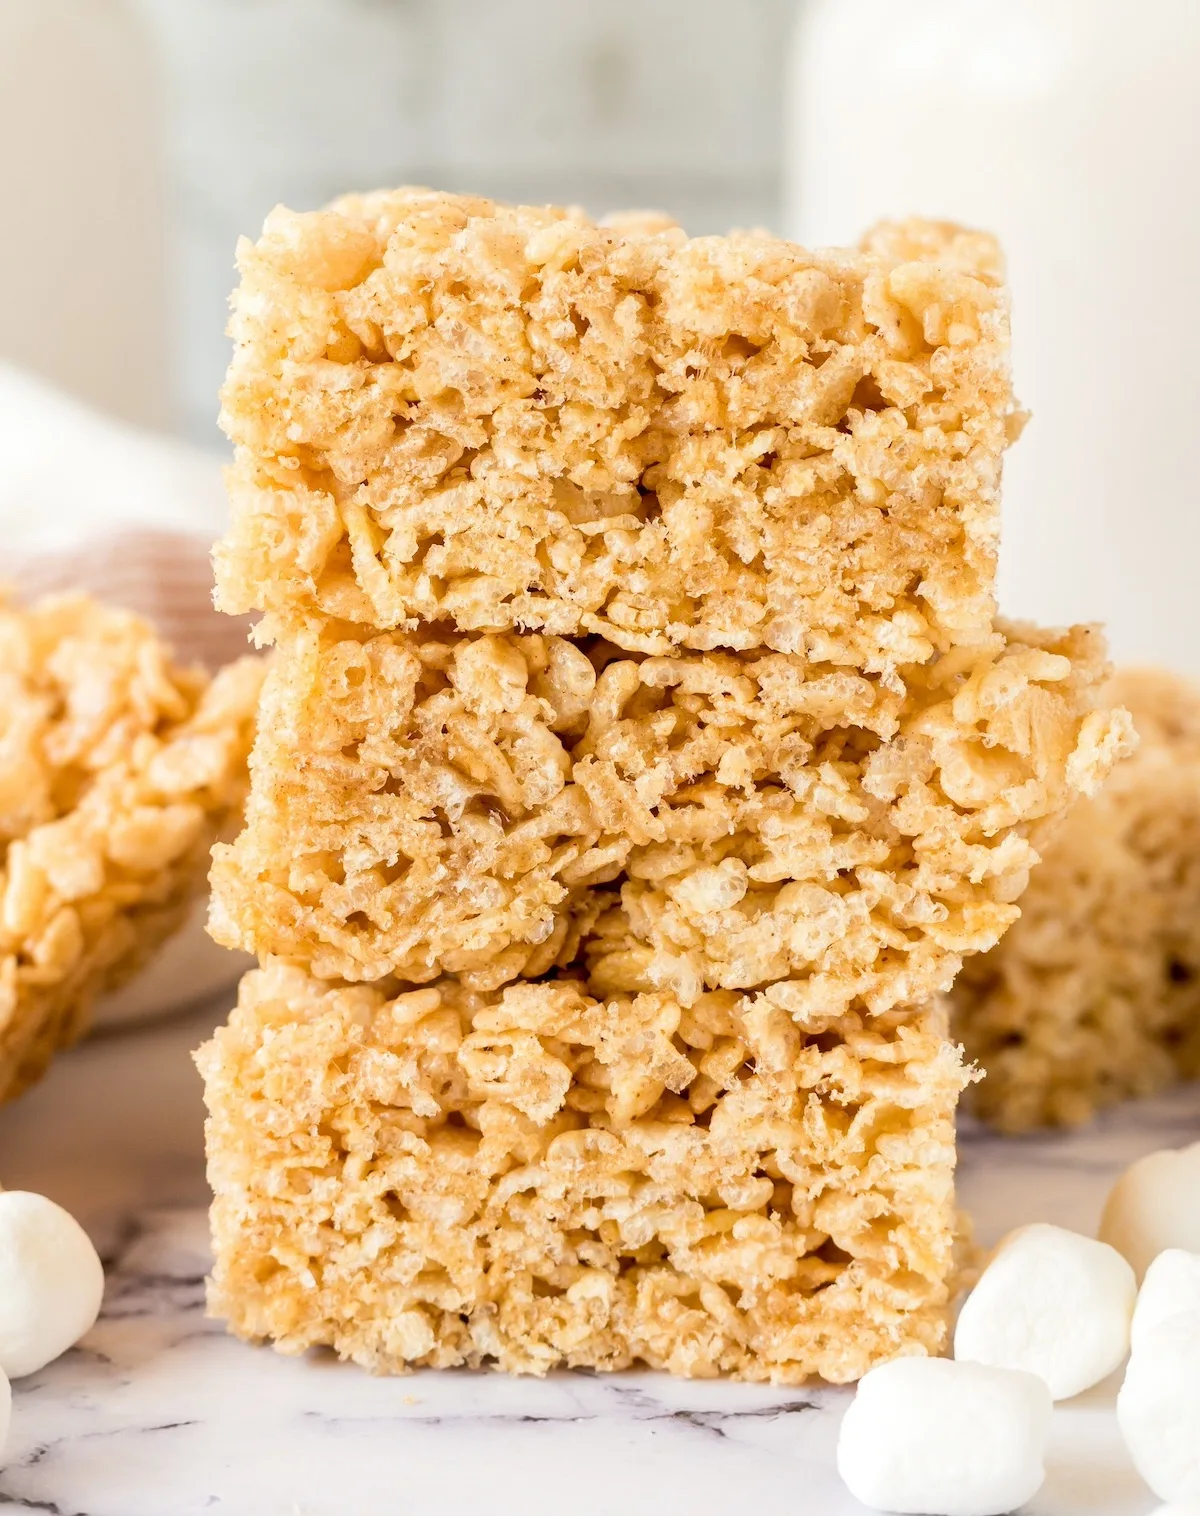 Brown Butter Rice Krispie Treats You'll Love - DIY Candy